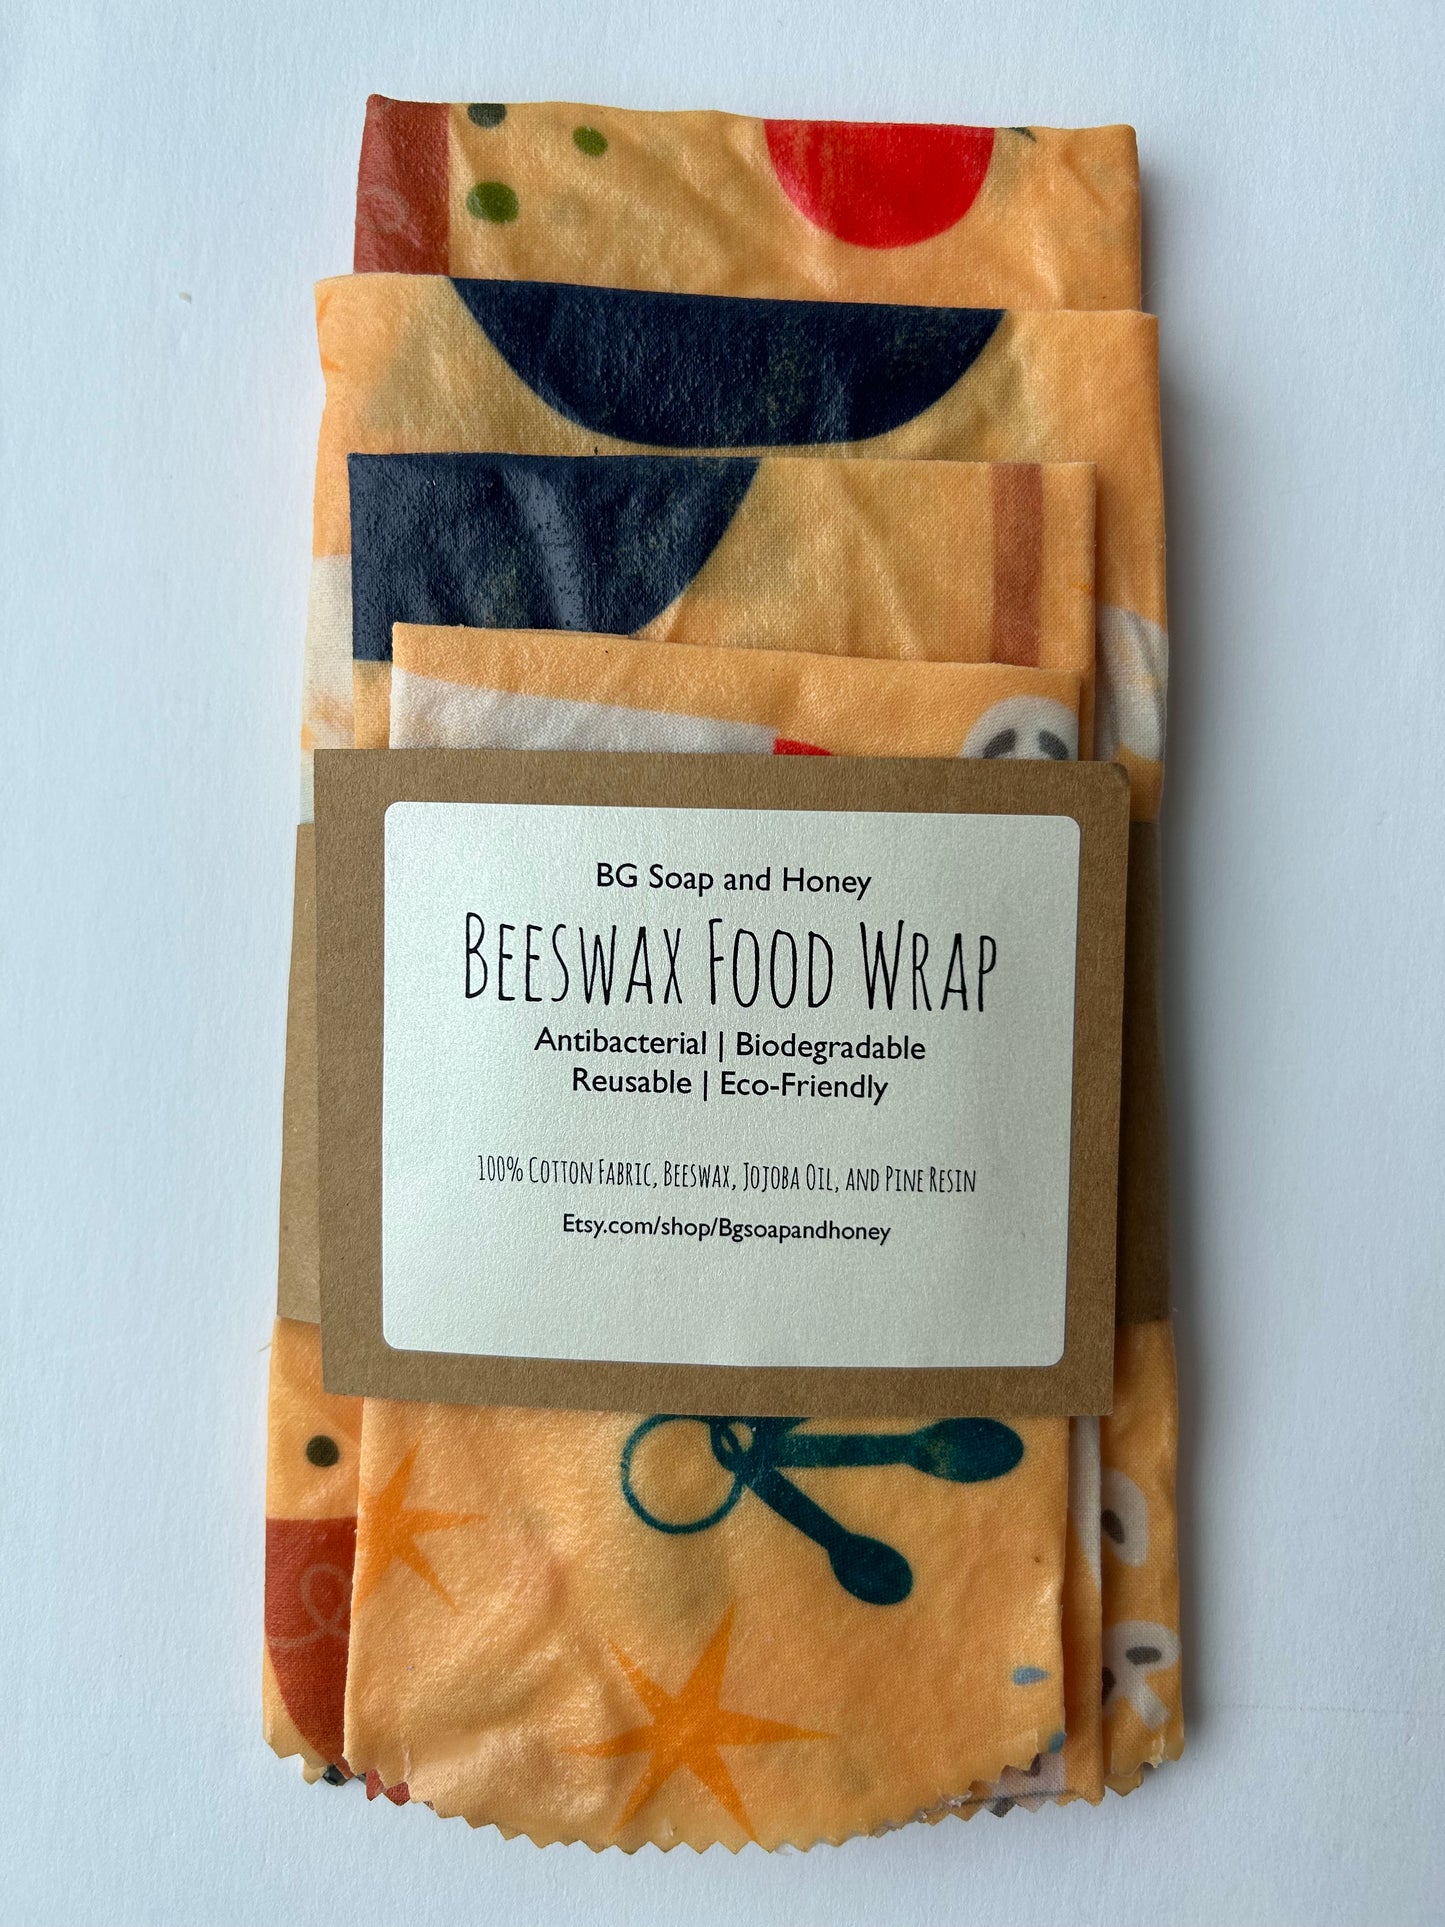 Beeswax Food Wrap Set of 4 - 6 patterns to choose from- Reusable Food Wraps - Food Storage - Green Living - Eco Friendly Kitchen